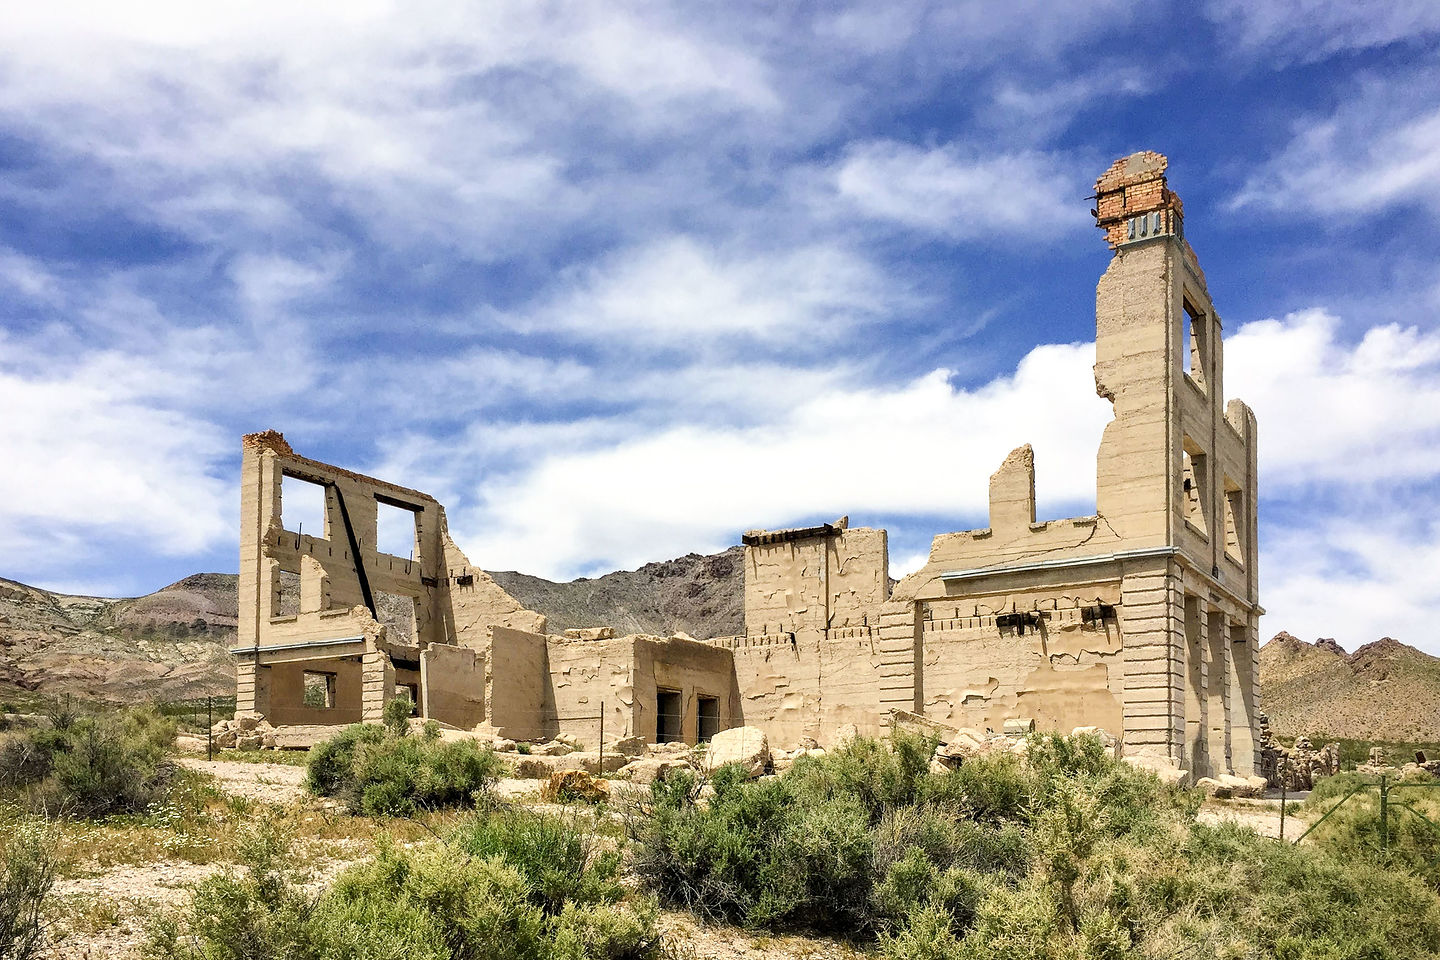 The old Cook Bank of Rhyolite